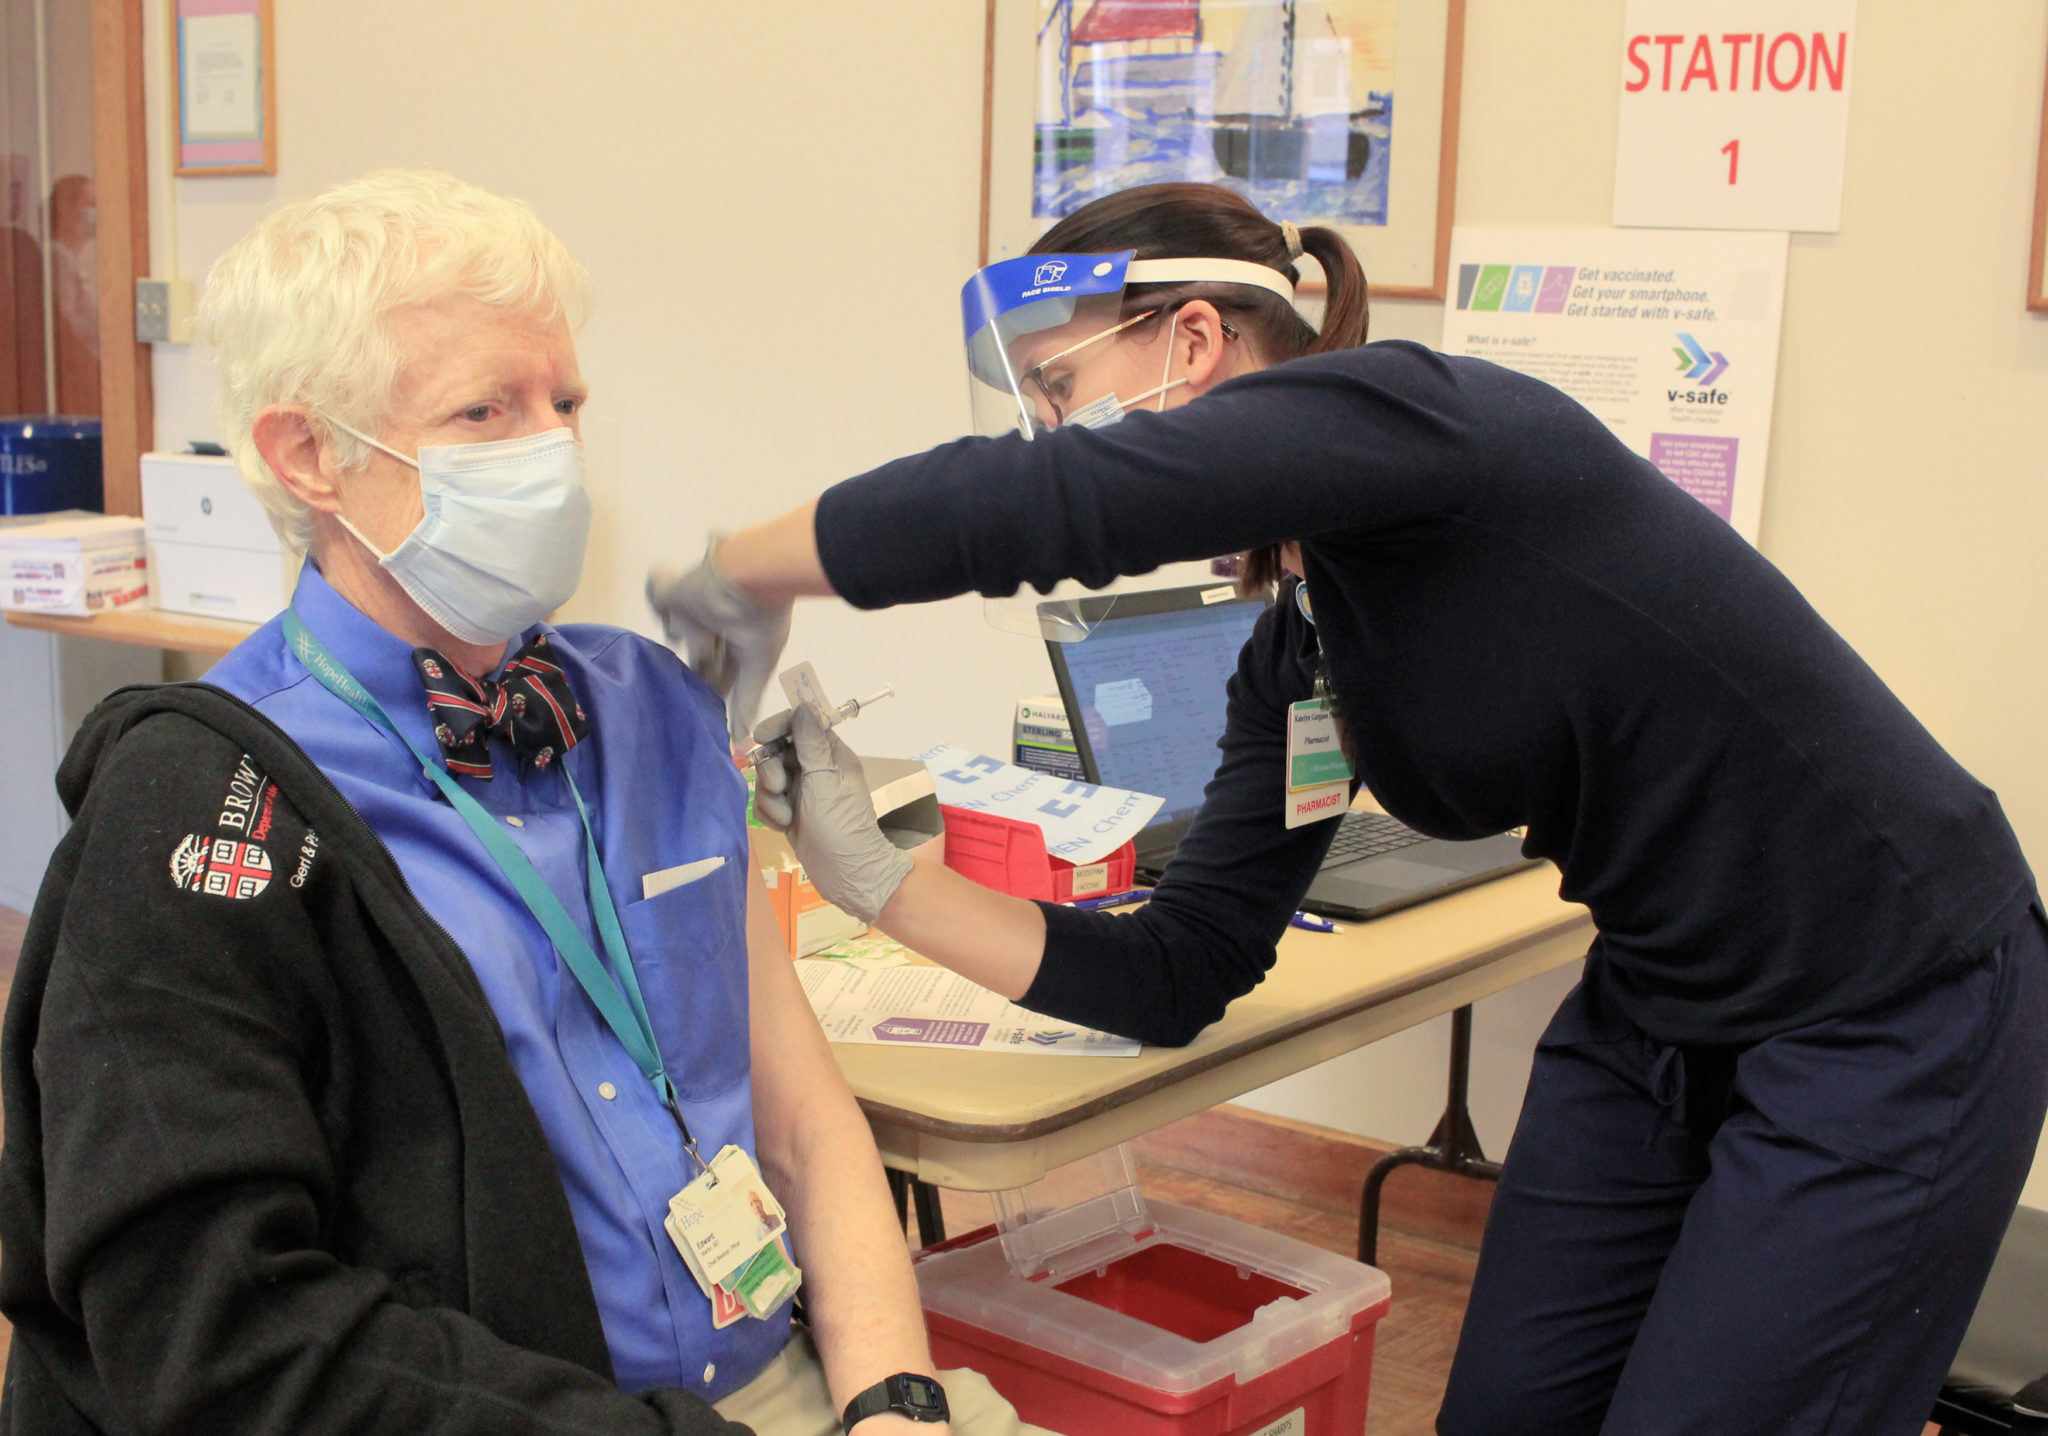 Man with white hair in a medical mask is receiving the COVID-19 vaccine